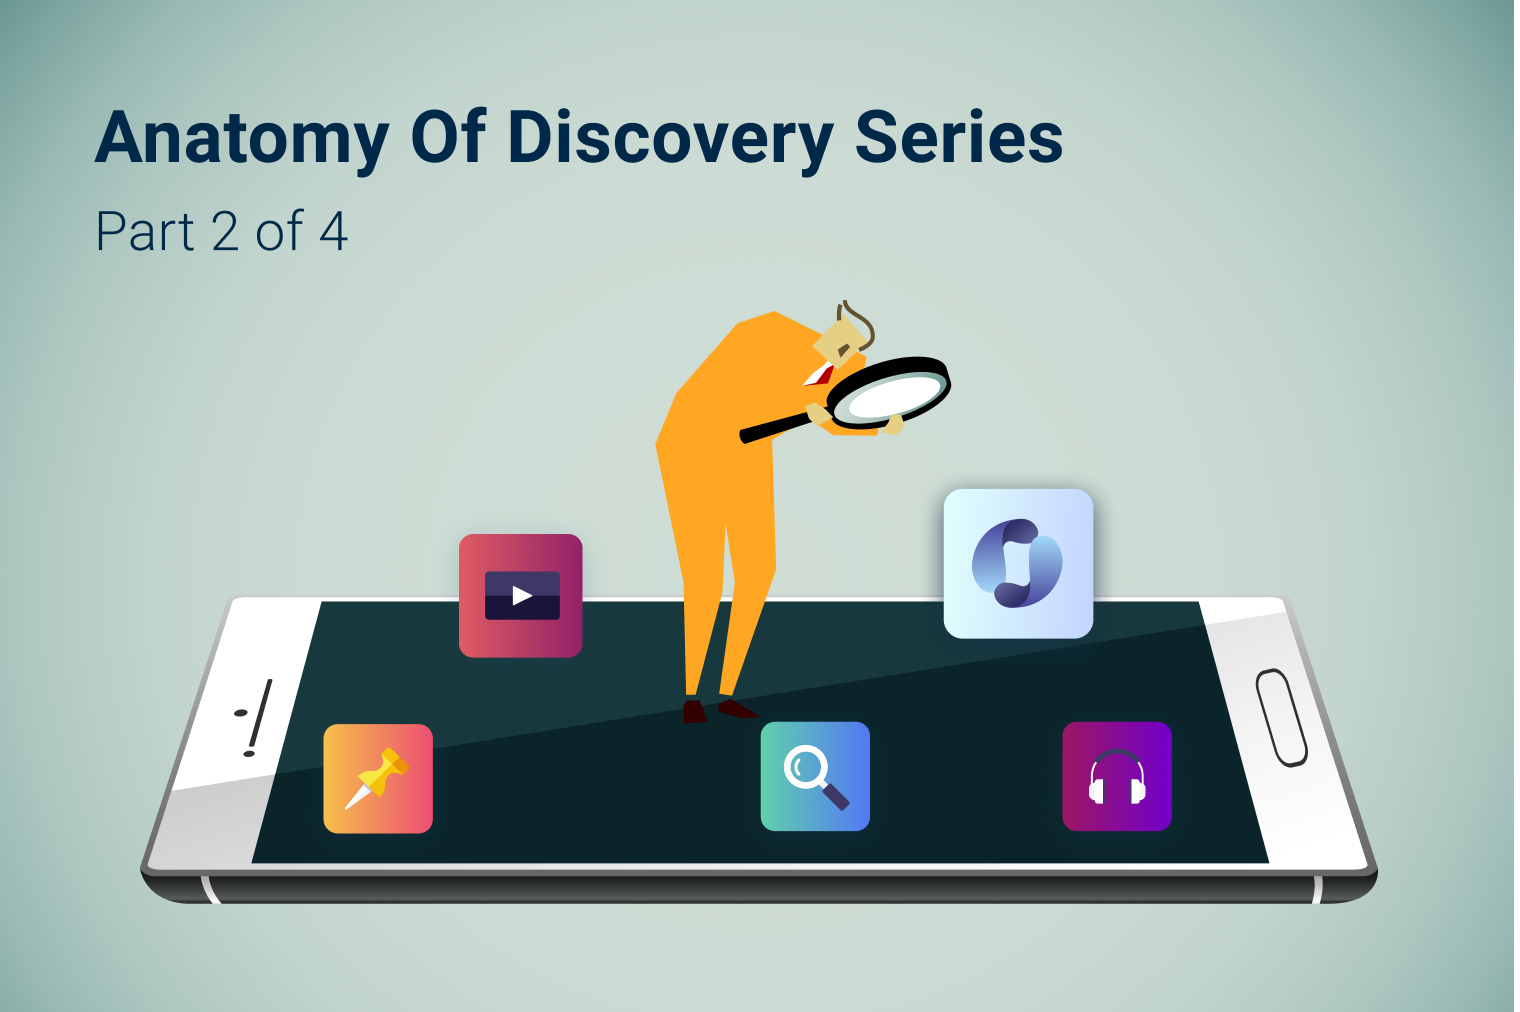 Anatomy of App Discovery Part 2: The Days to 25 Metric and “Fast Discovered” Apps